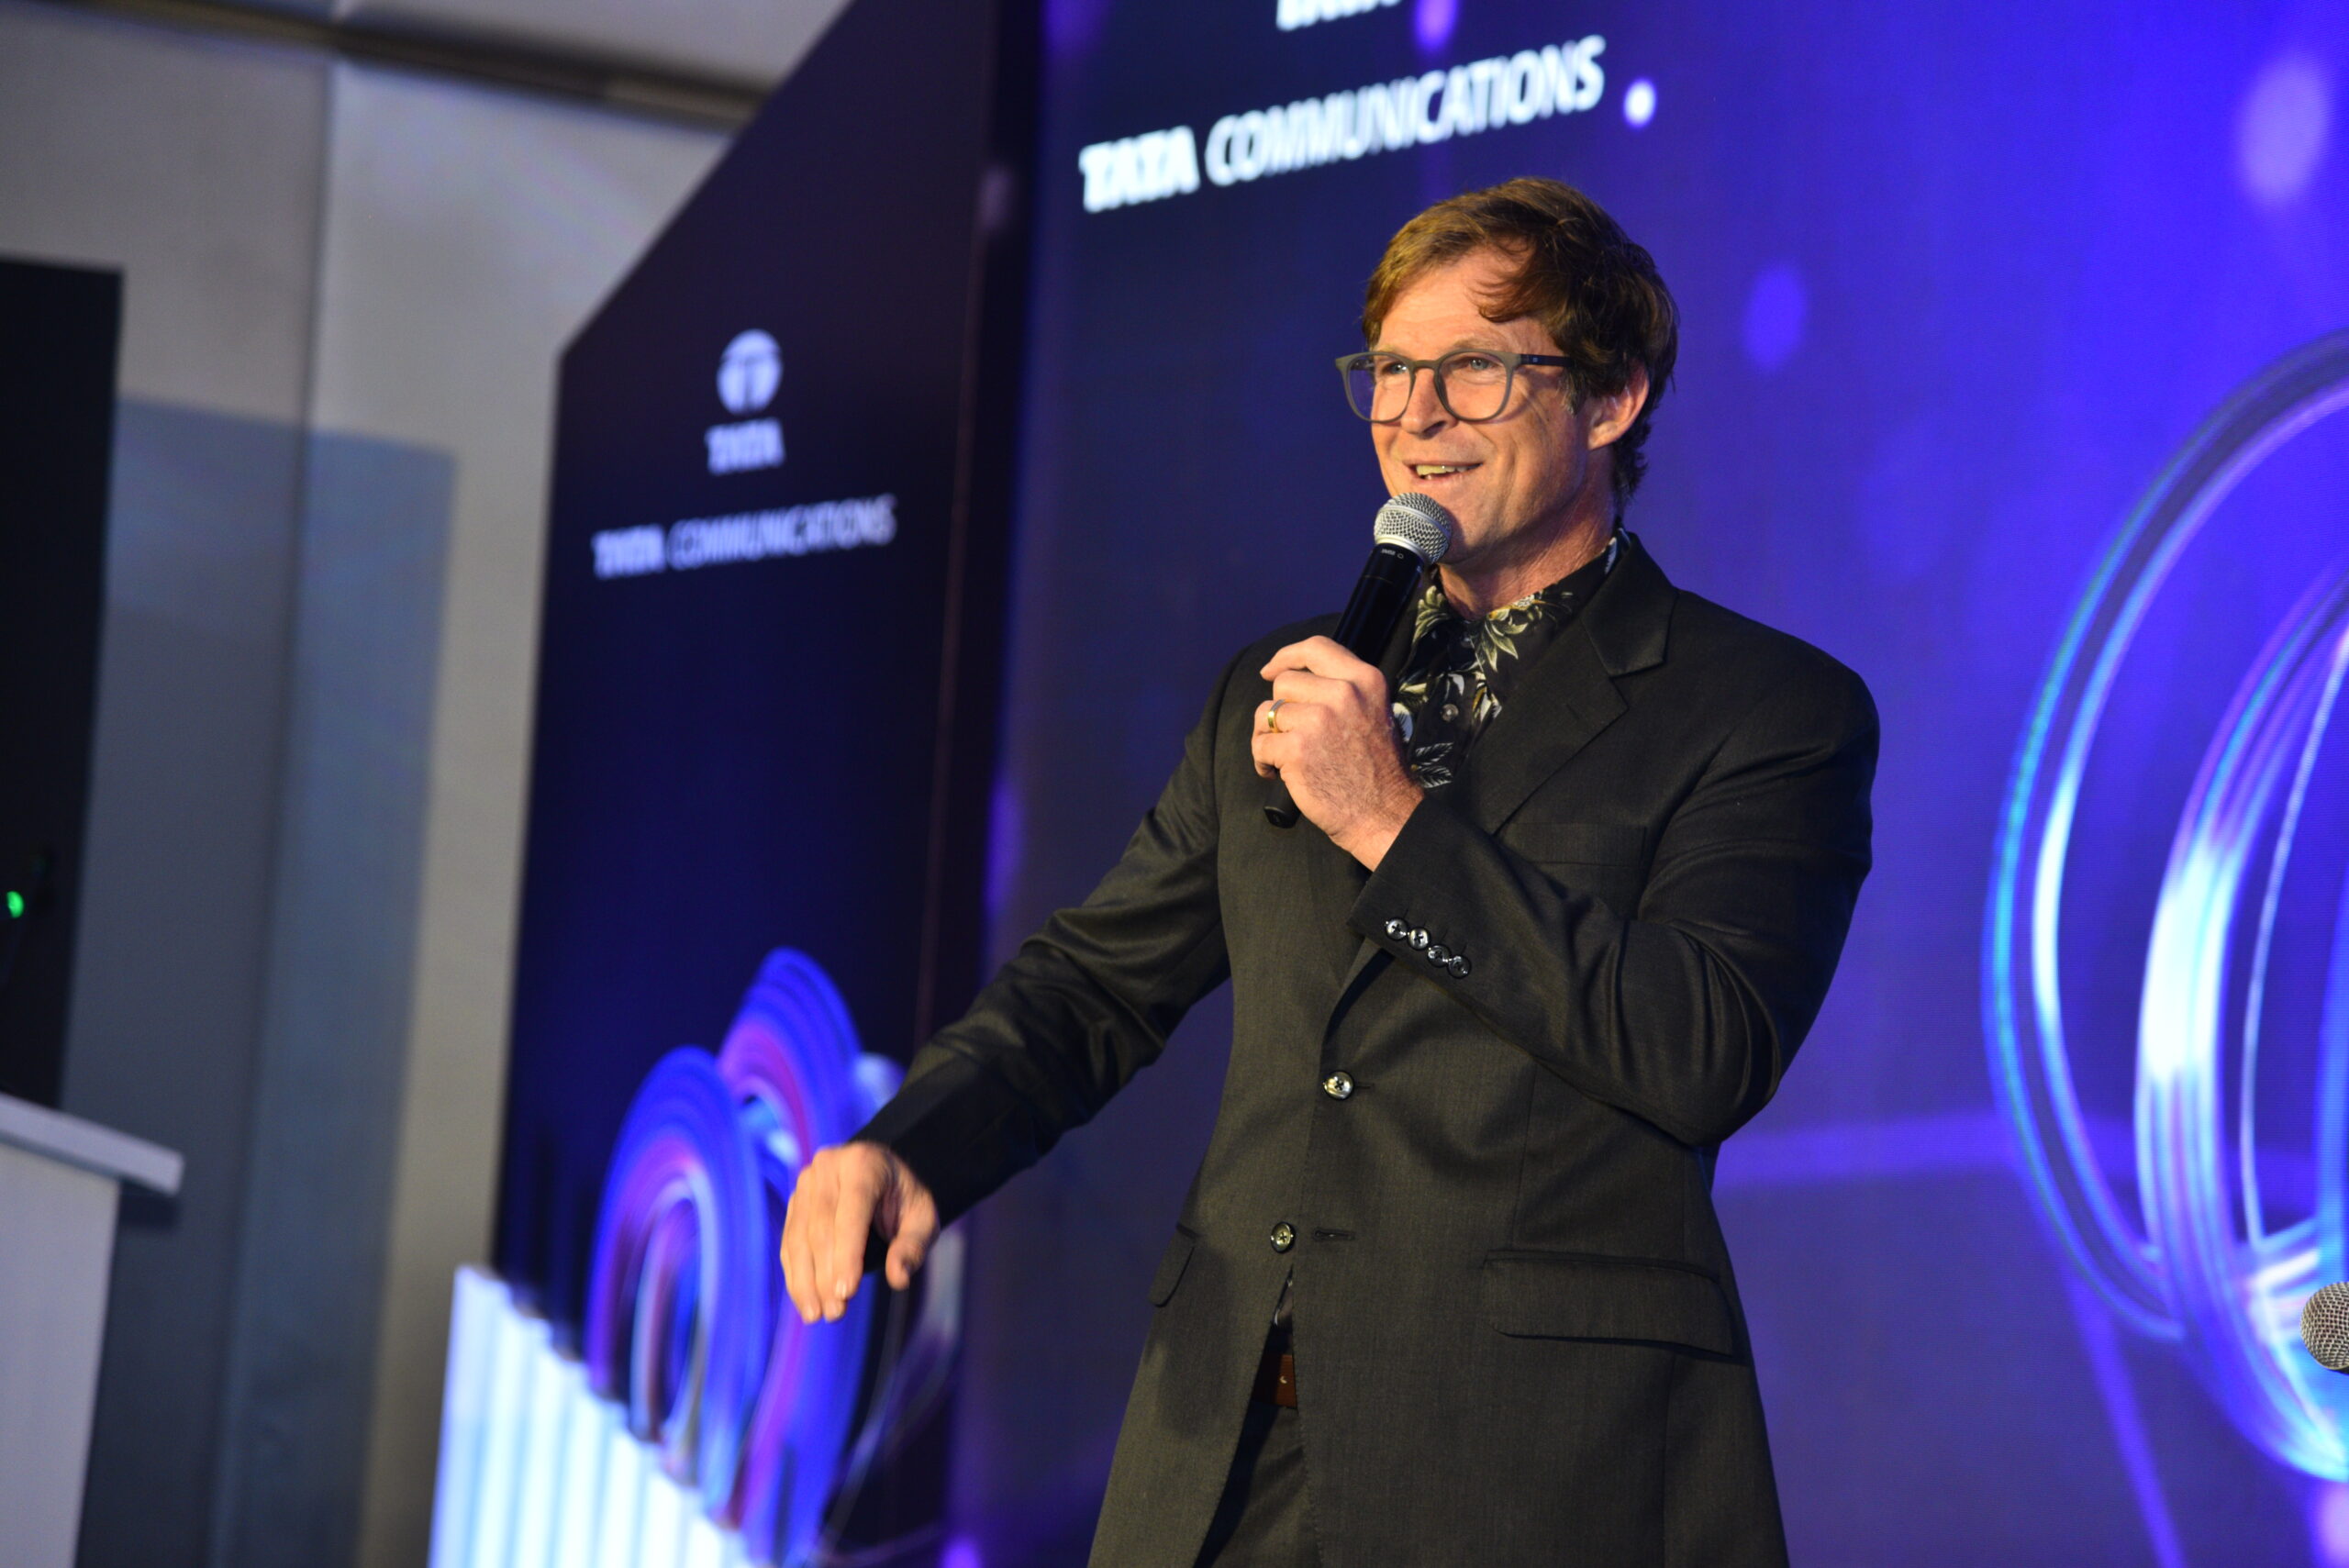 Jonty Rhodes as a motivational speaker at a corporate event in Mumbai